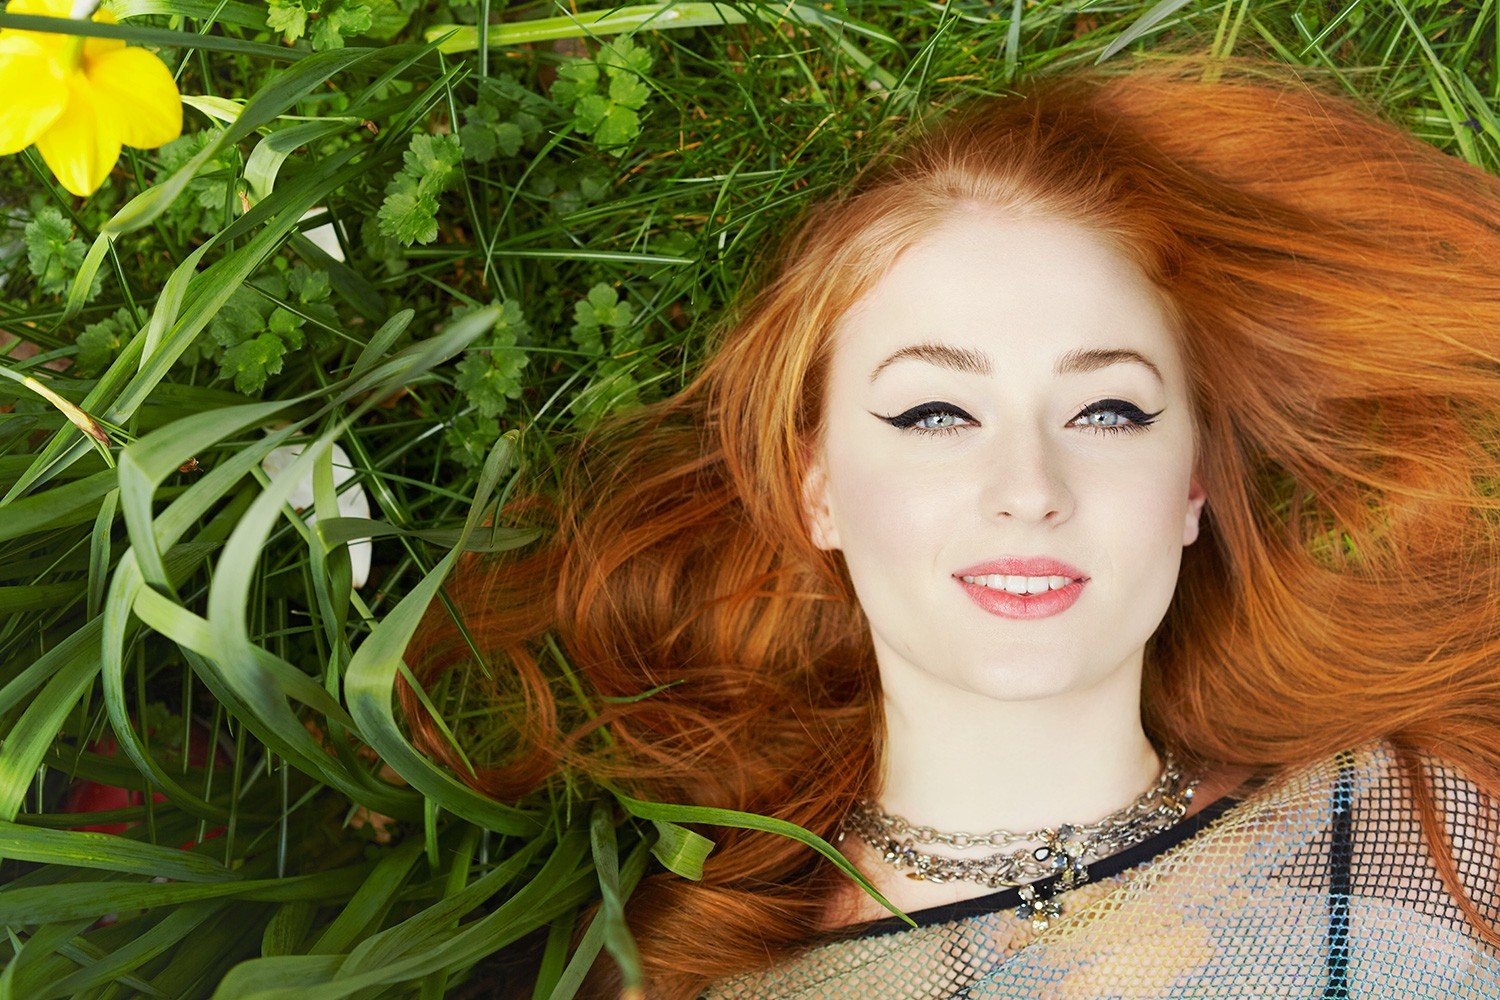 women, Model, Redhead, Long hair, Face, Blue eyes, Red lipstick, Open mouth, Smiling, Sophie Turner, Women outdoors, Lying down, Nature, Grass, Makeup, Yellow flowers Wallpaper